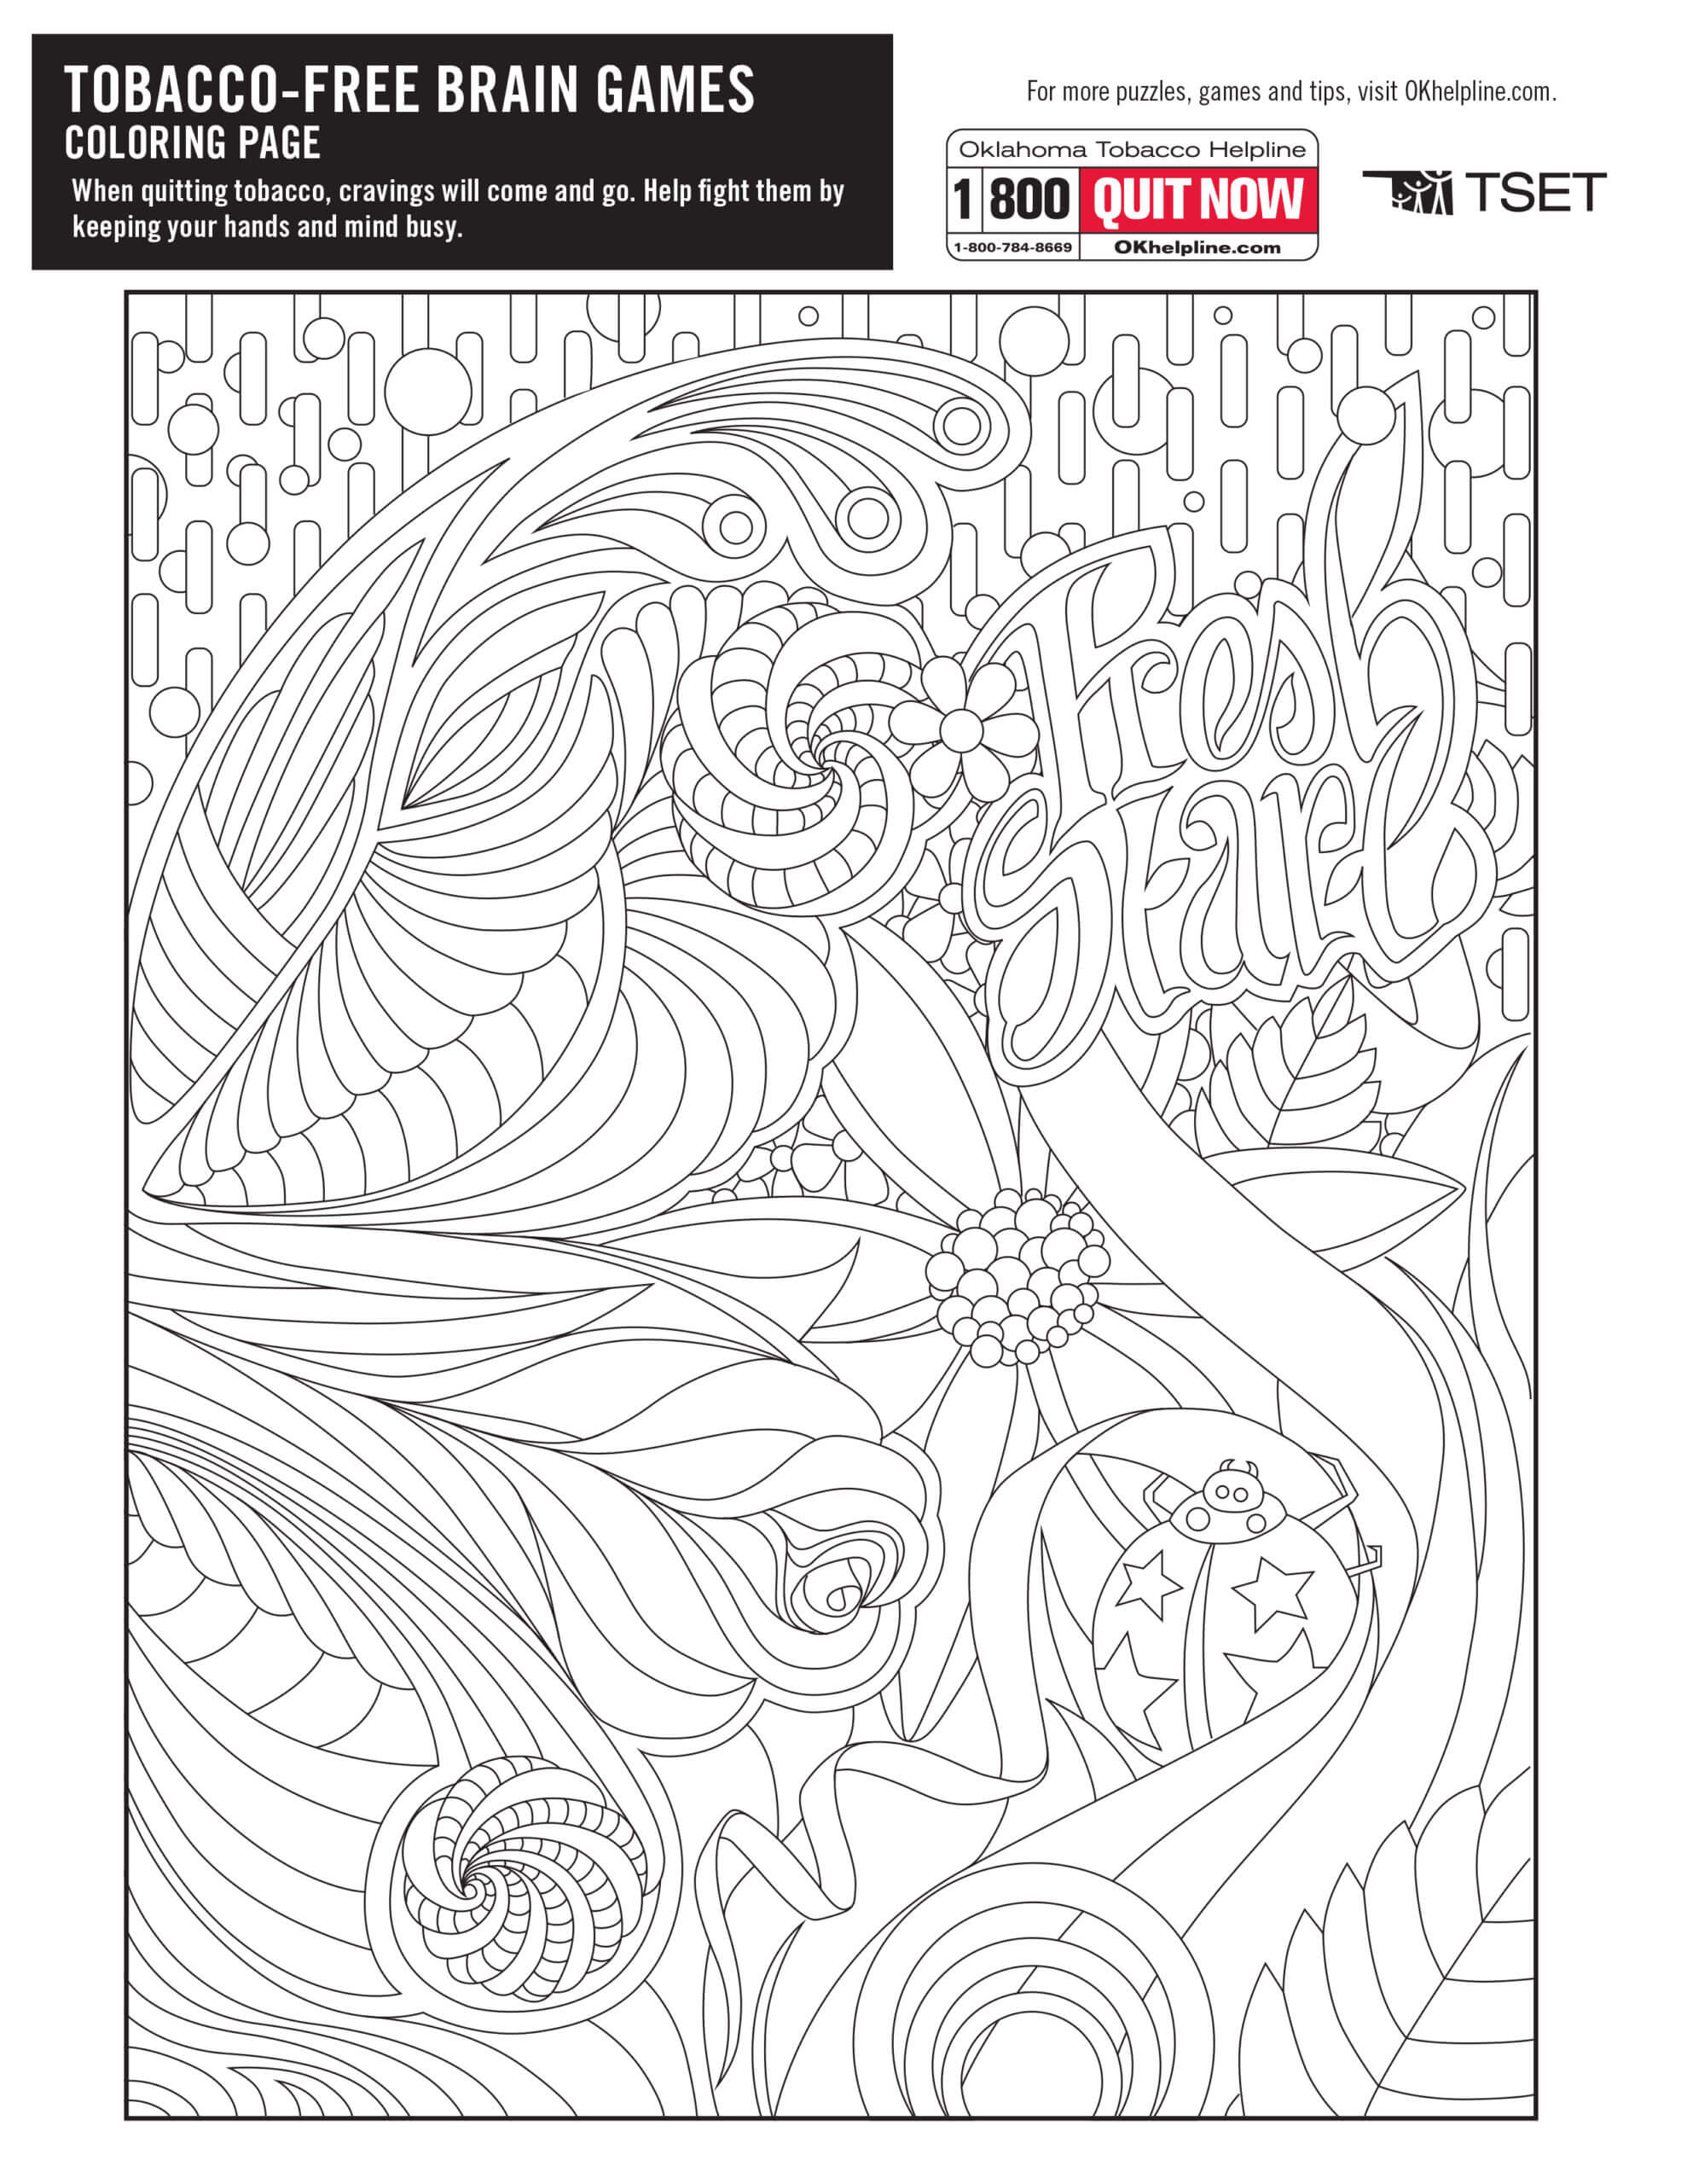 Adult coloring pages free coloring pages online